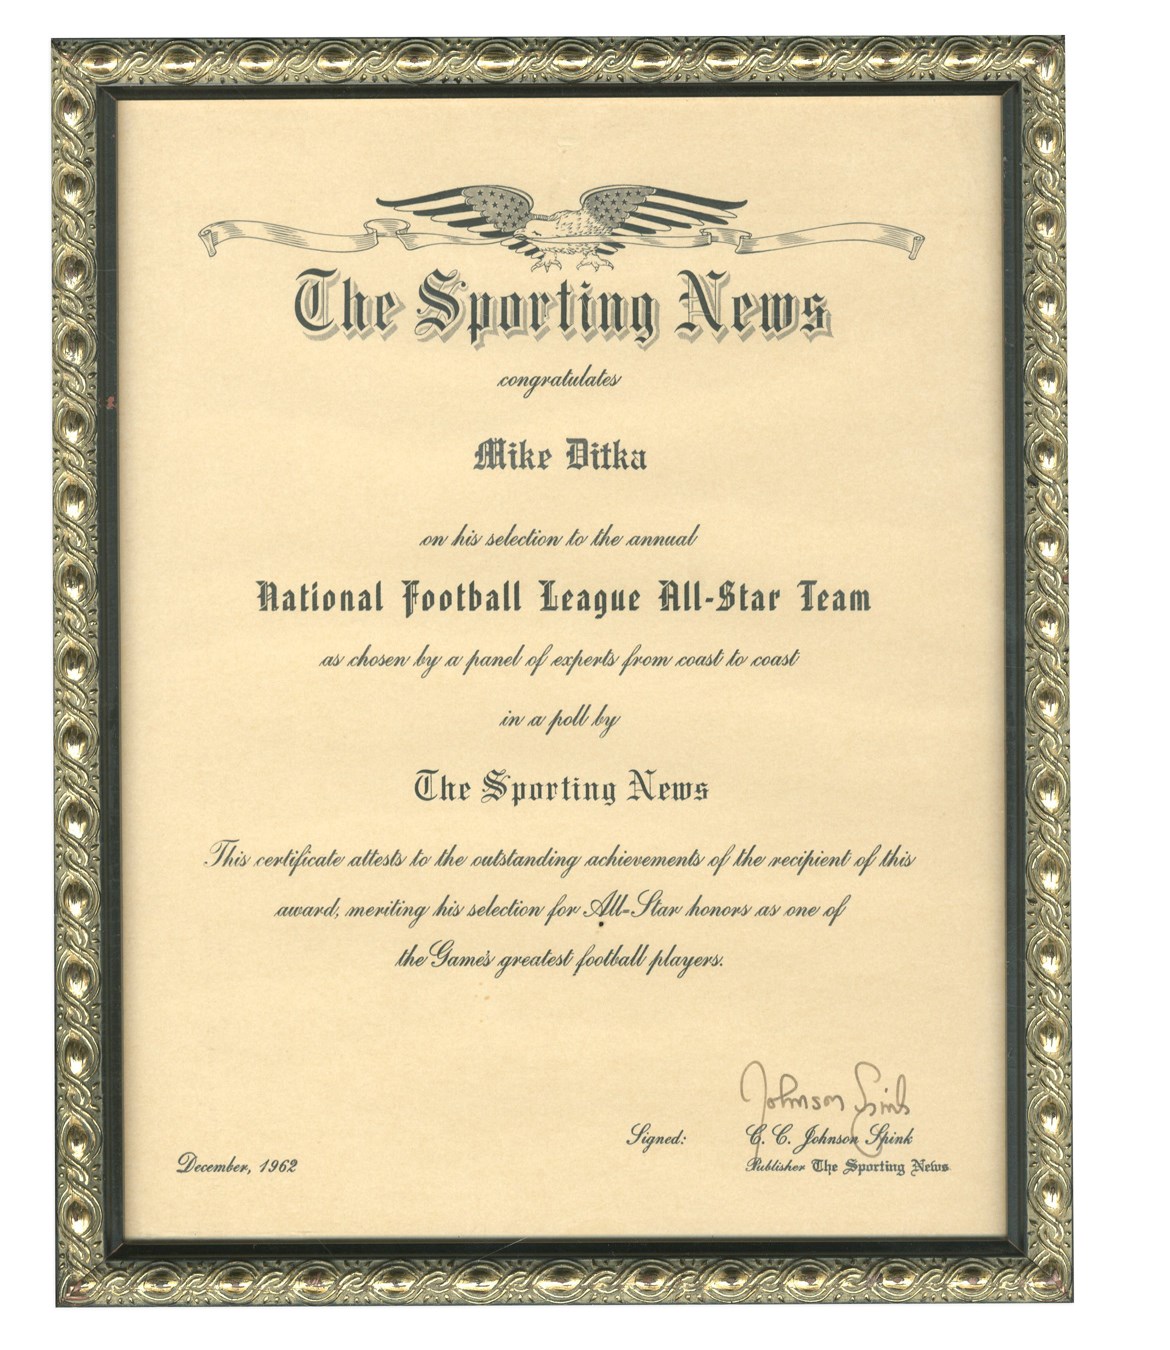 Mike Ditka 1960s Sporting News NFL All-Star Award (ex-Mike Ditka)